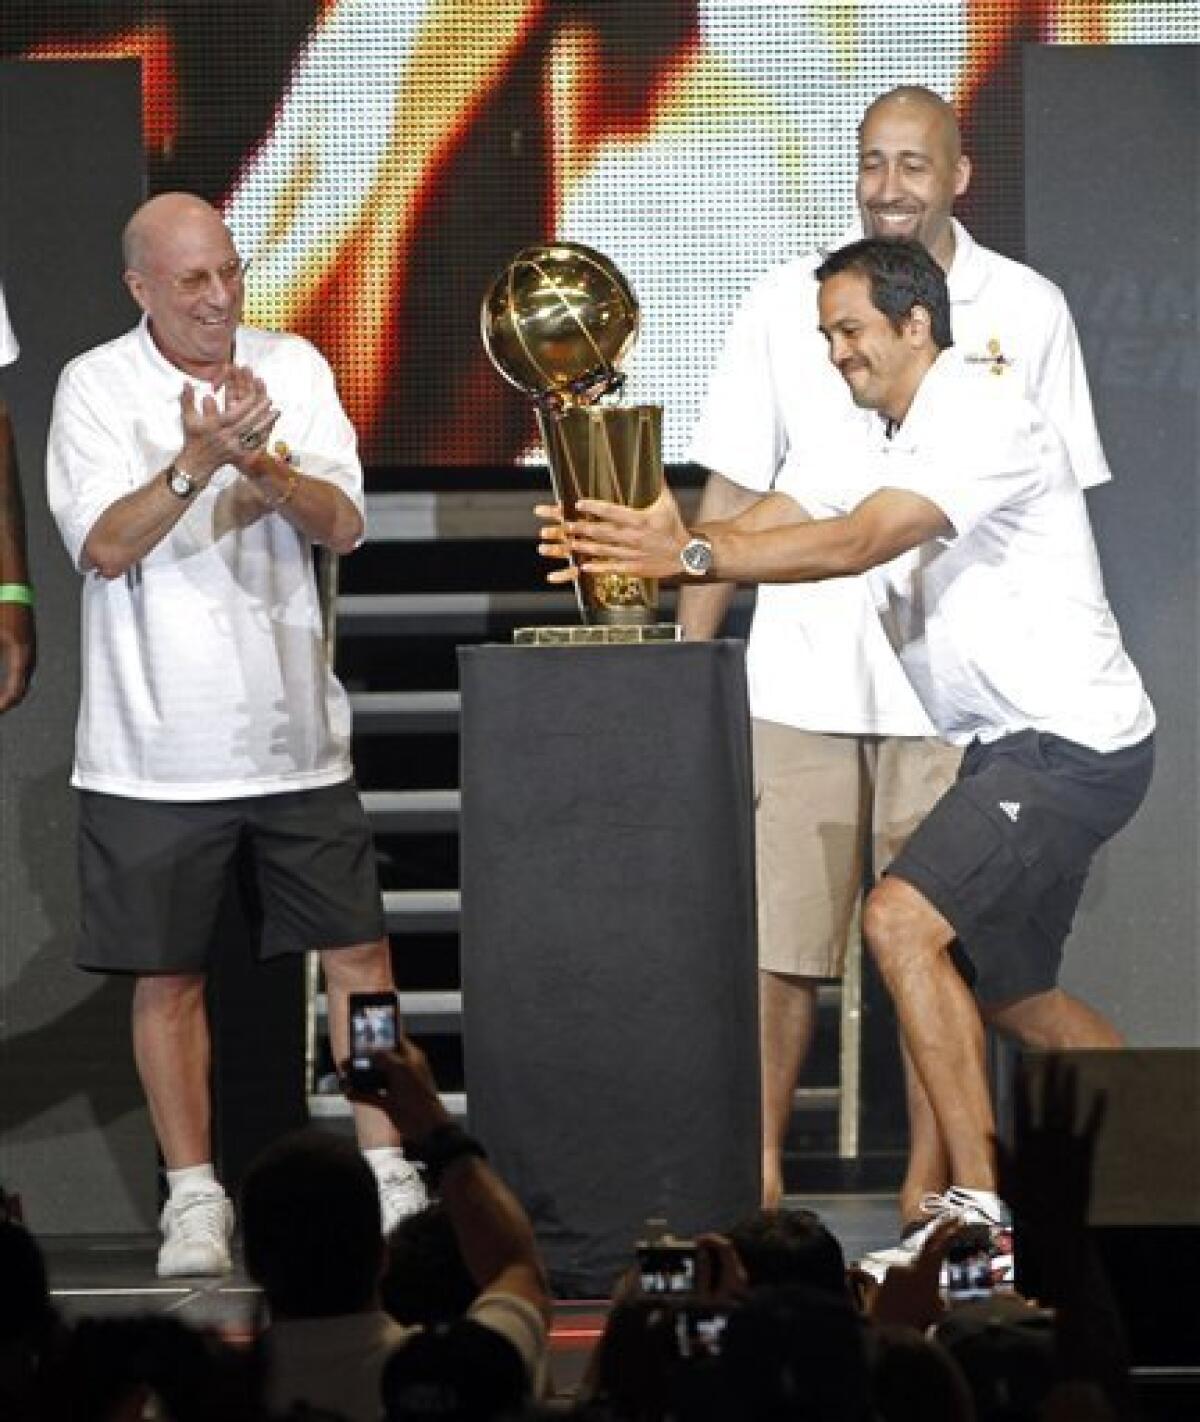 As promised, Coach `Spo' to bring along NBA trophy in visit